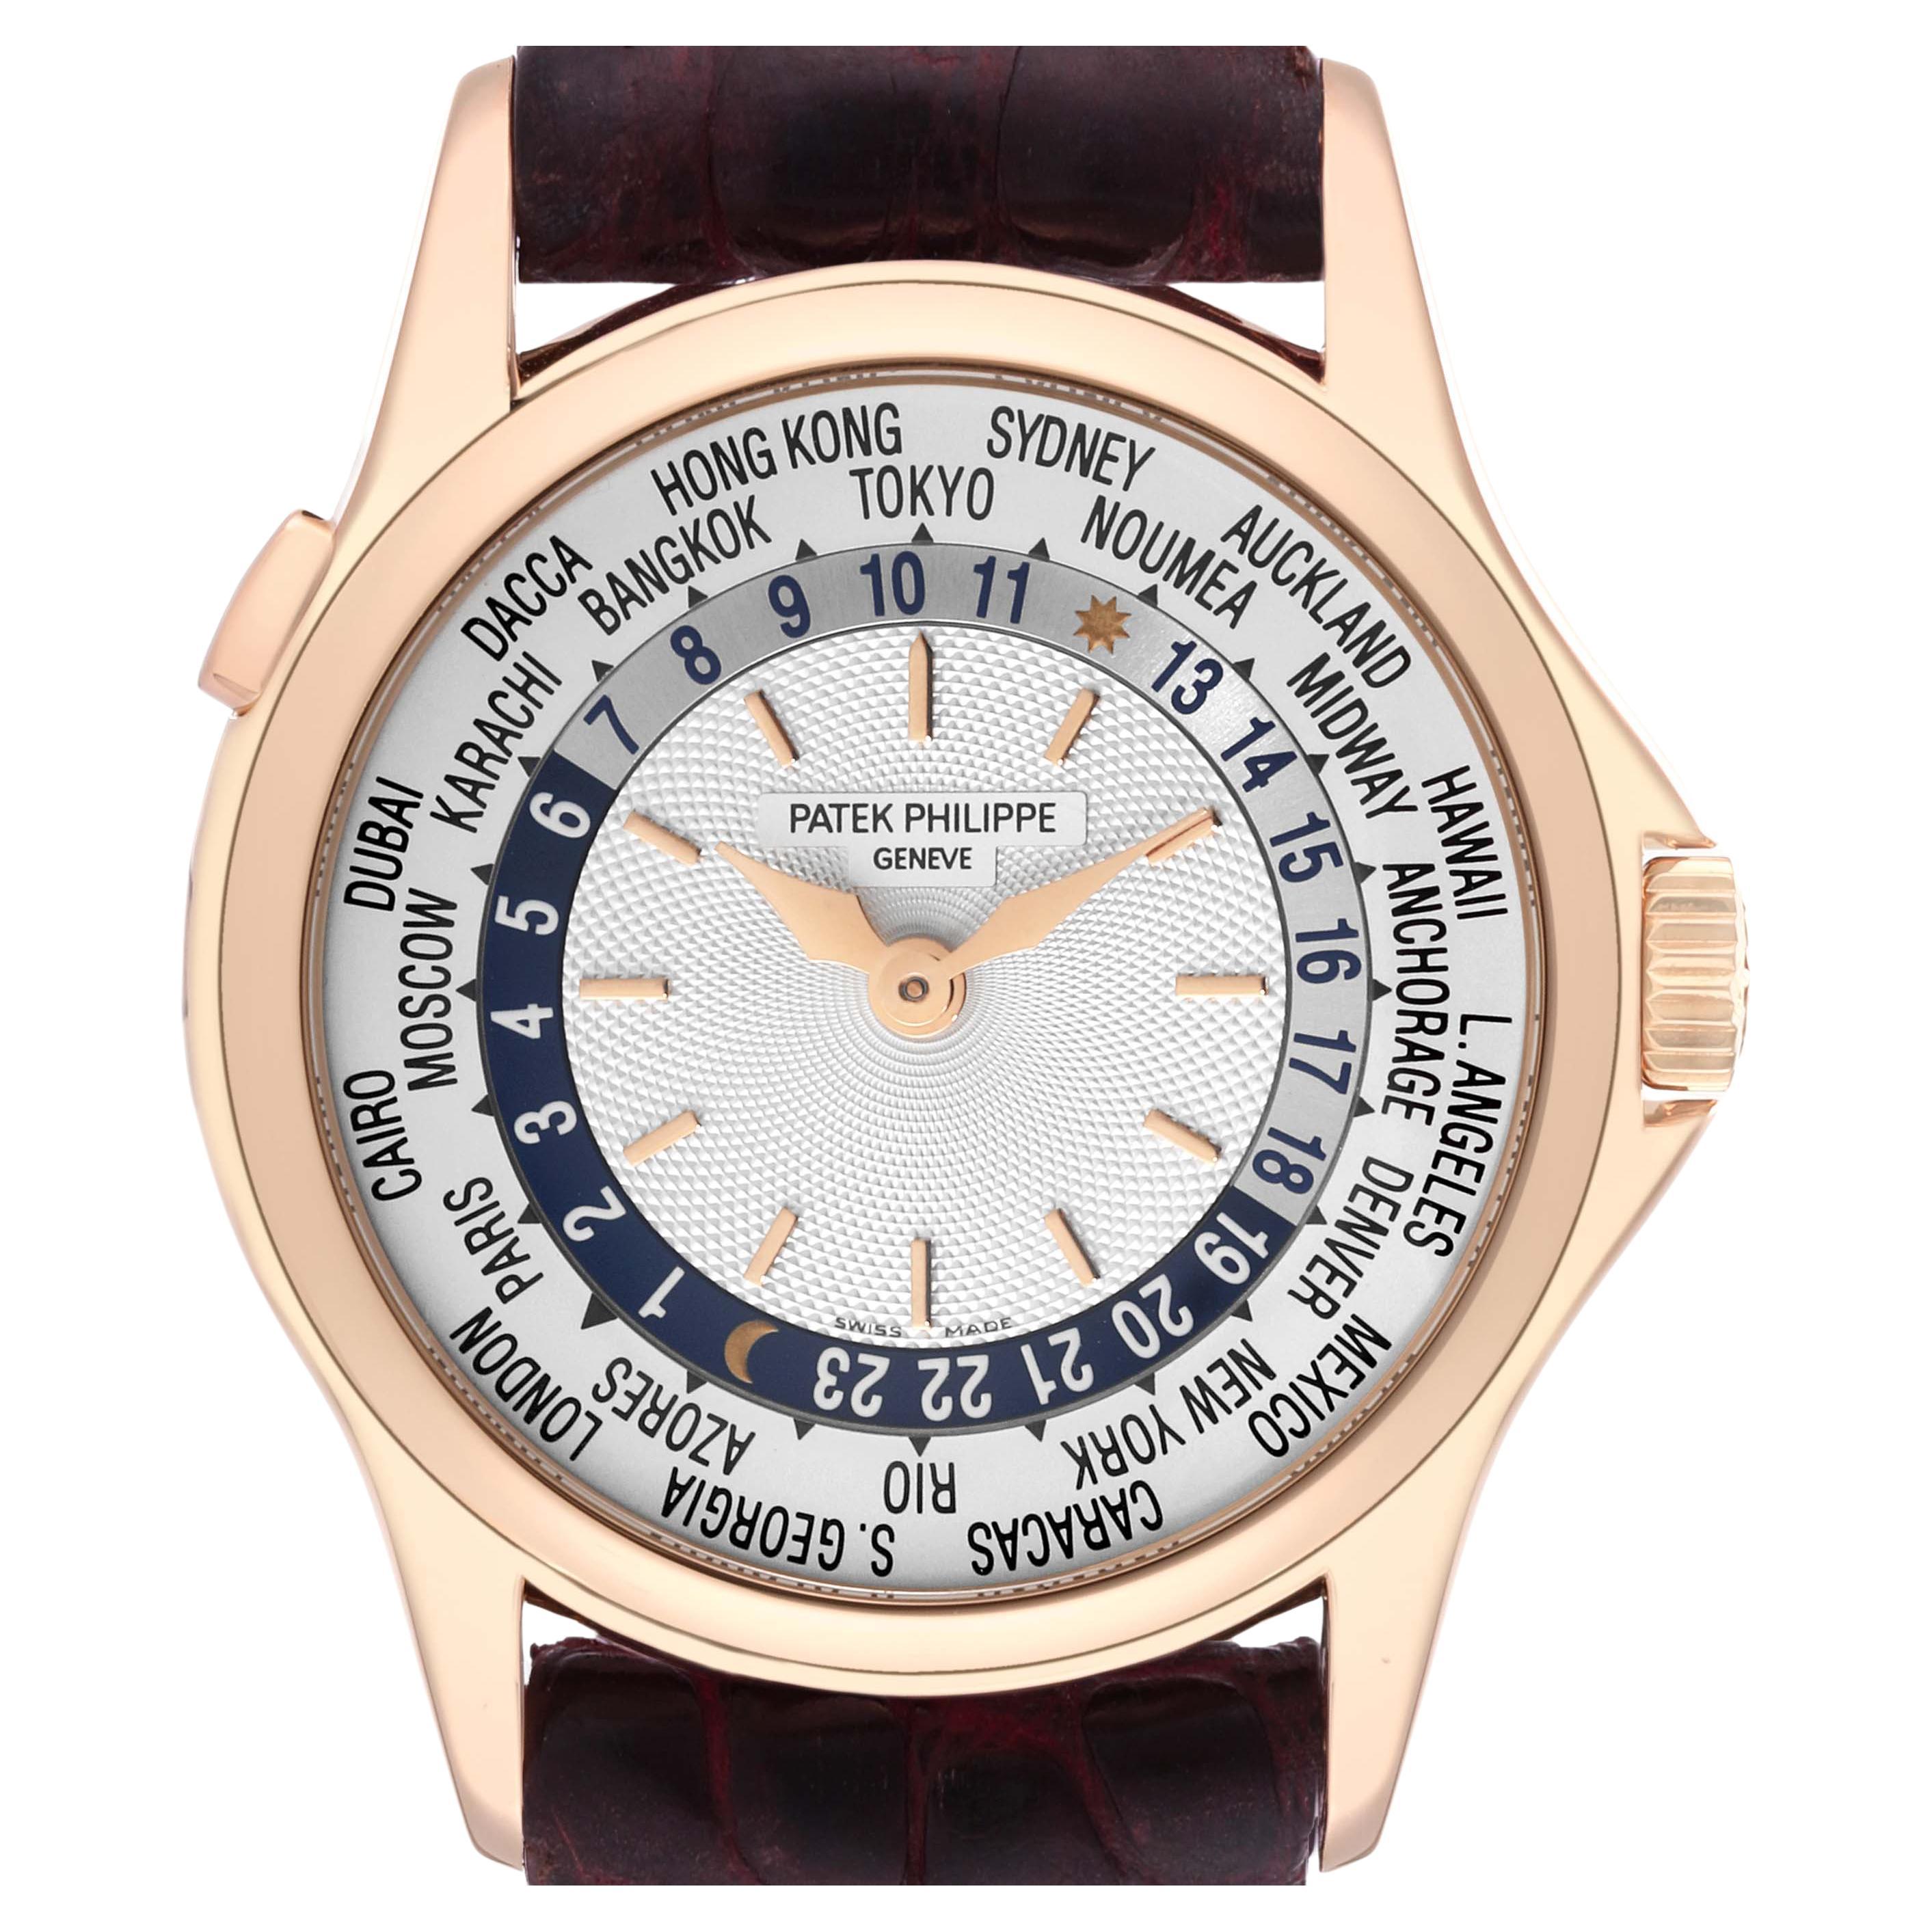 Patek Philippe World Time Automatic Silver Dial Rose Gold Mens Watch 5110